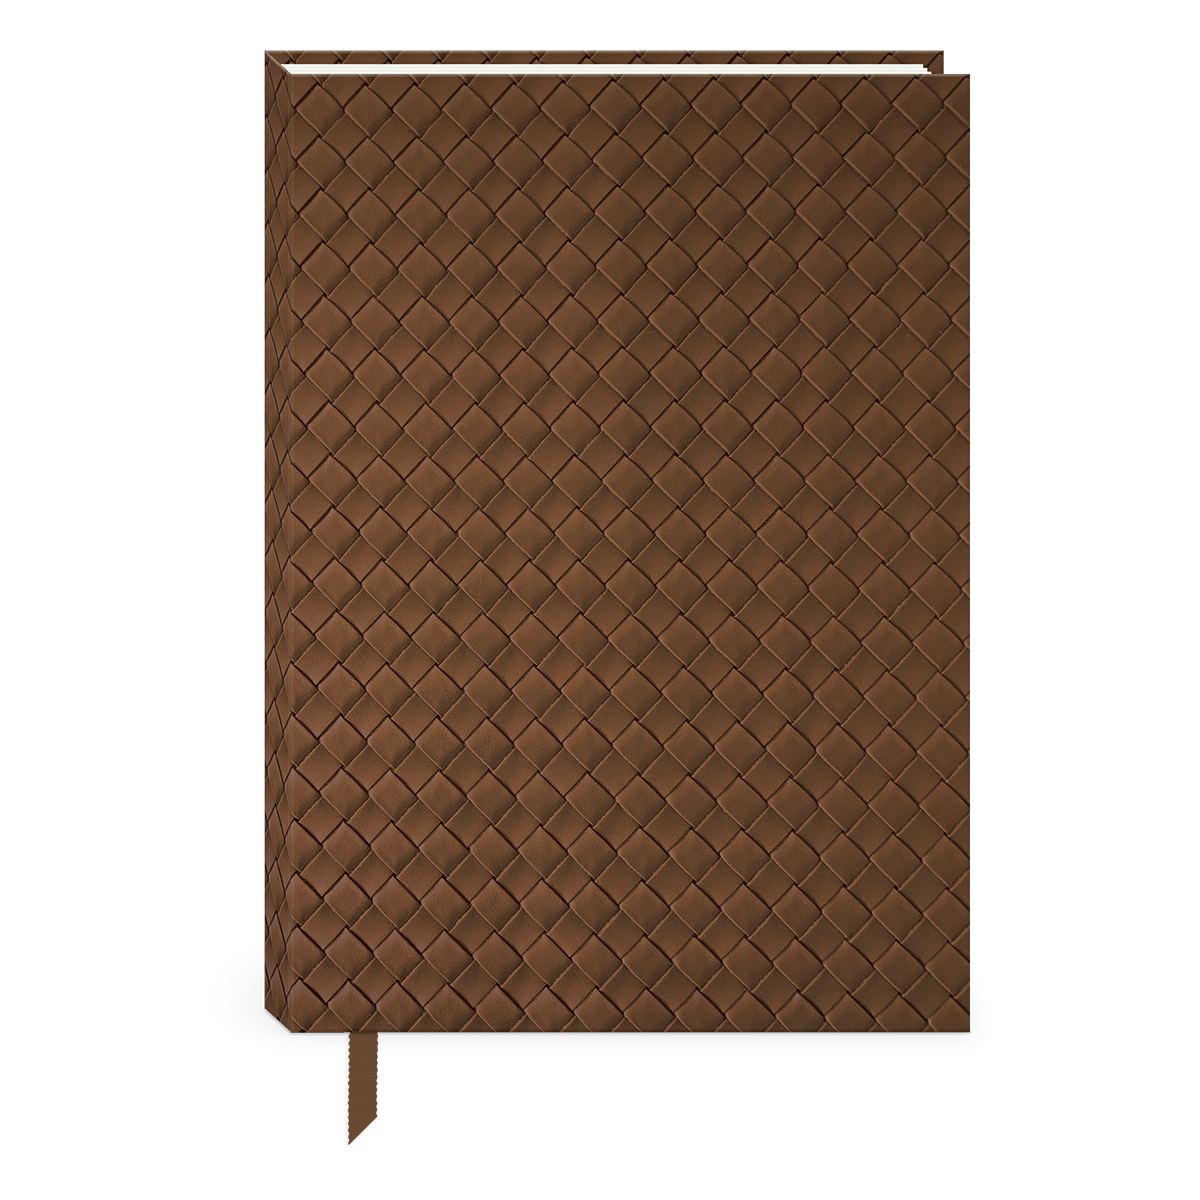 Mixed Media Brown Weave Hardcover Journal Product